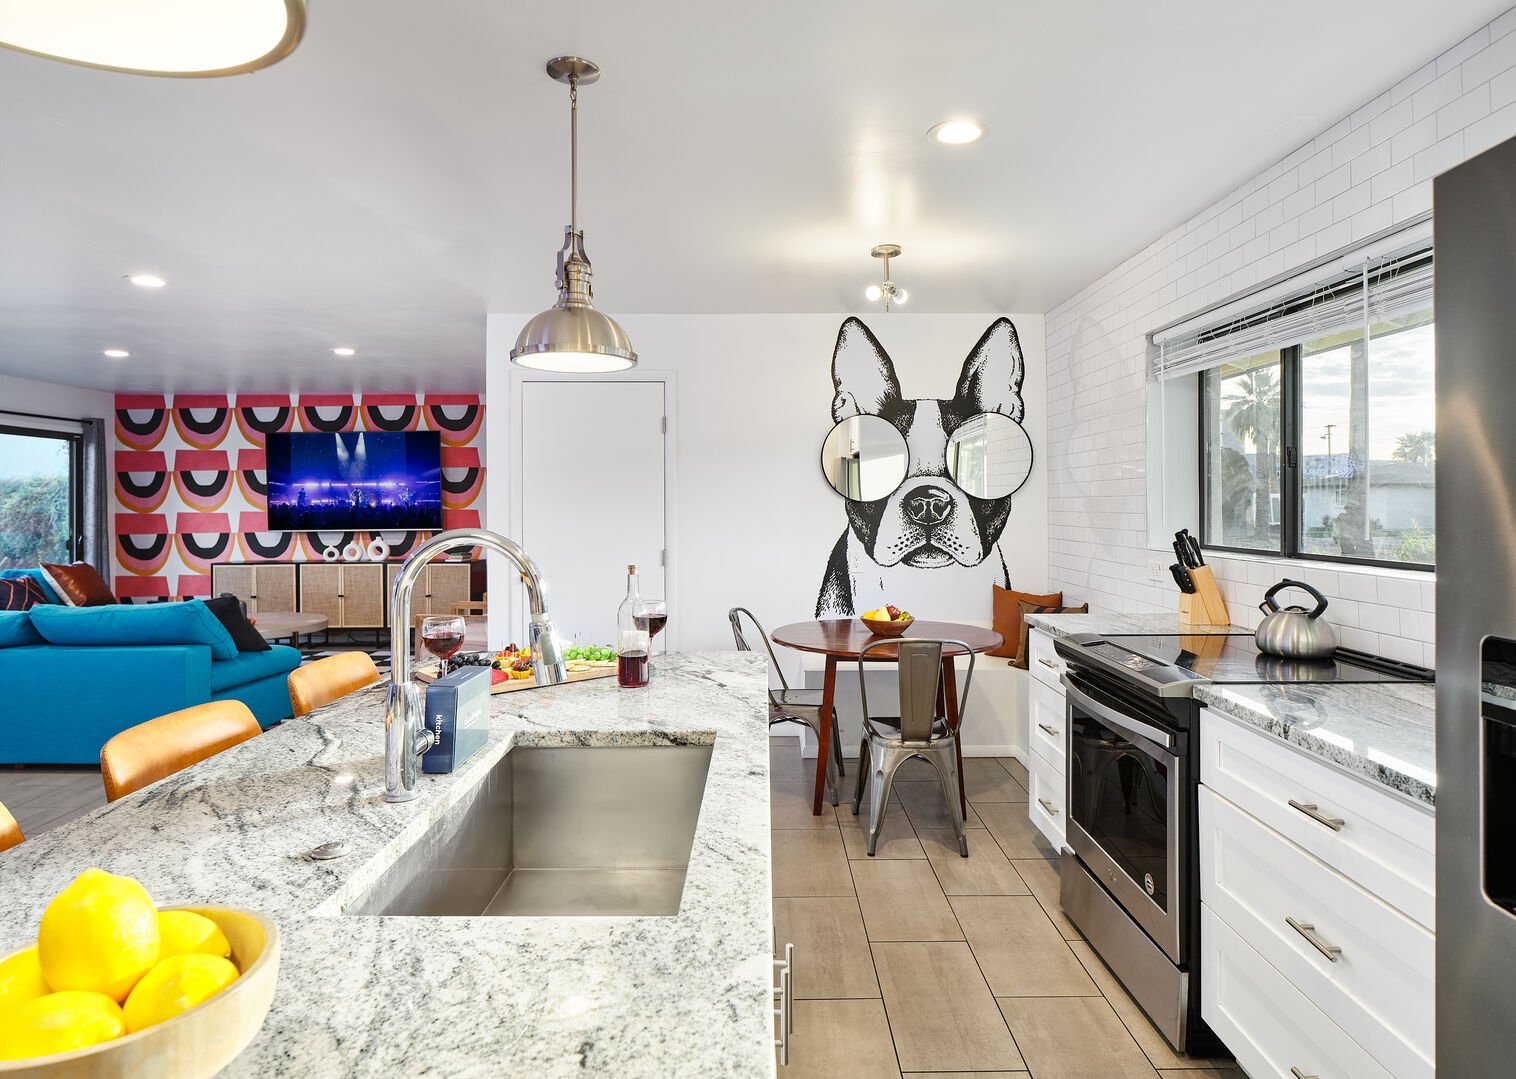 Bright and open kitchen supplied with your basic cooking essentials, stainless steel appliances, breakfast bar seating,  and breakfast nook. Features custom mural Frenchie!